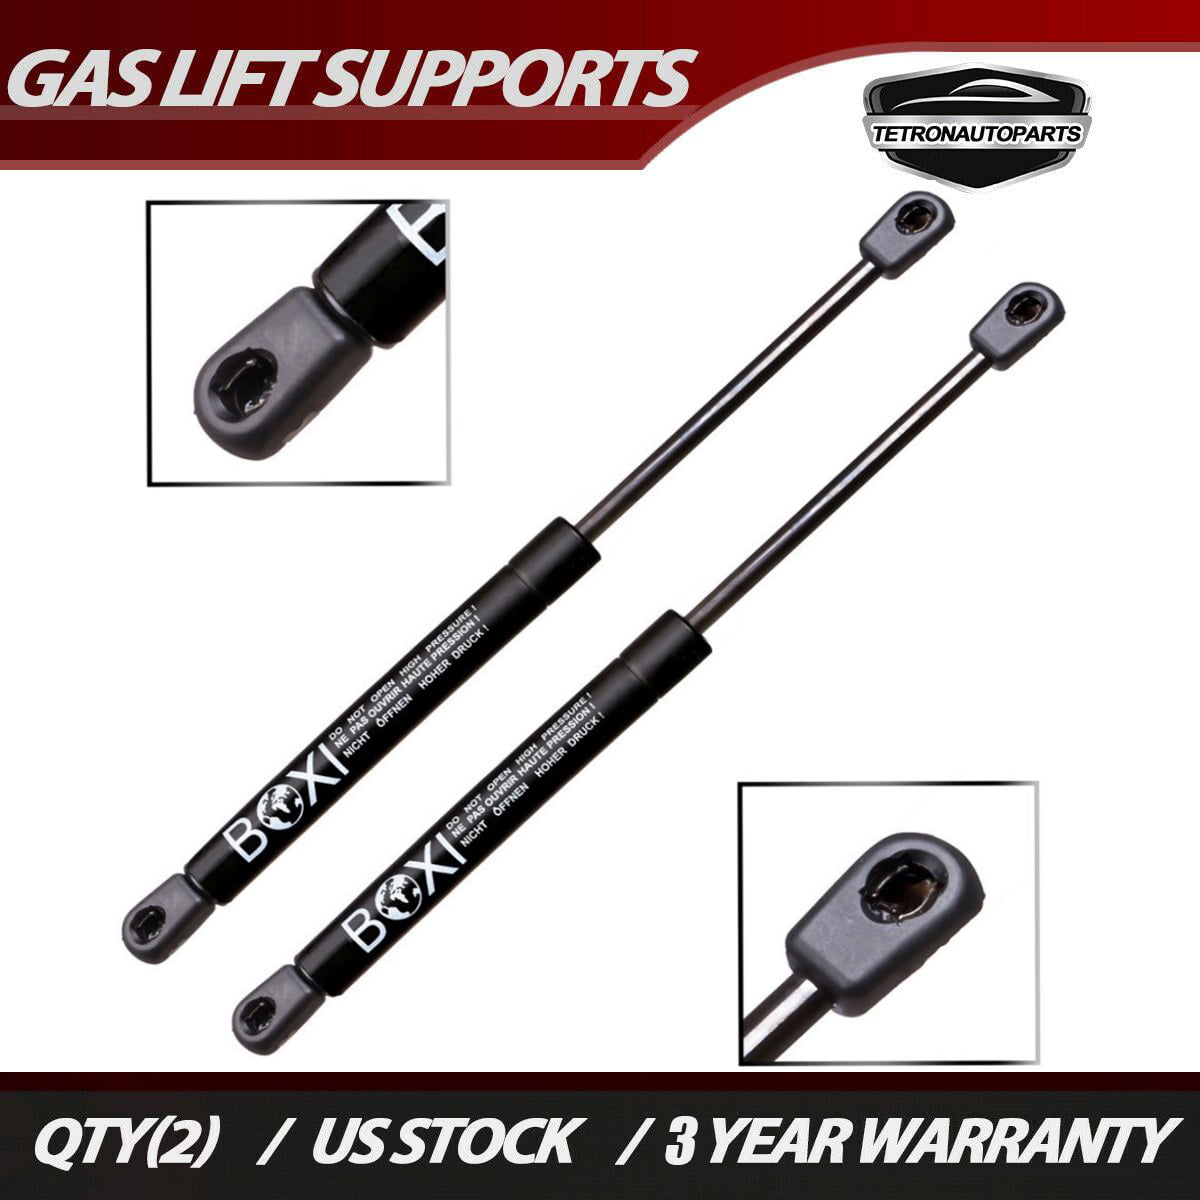 2 Pieces SET Tuff Support Front Hood Lift Supports 2002 To 2012 Land Rover Range Rover excluding LR3 